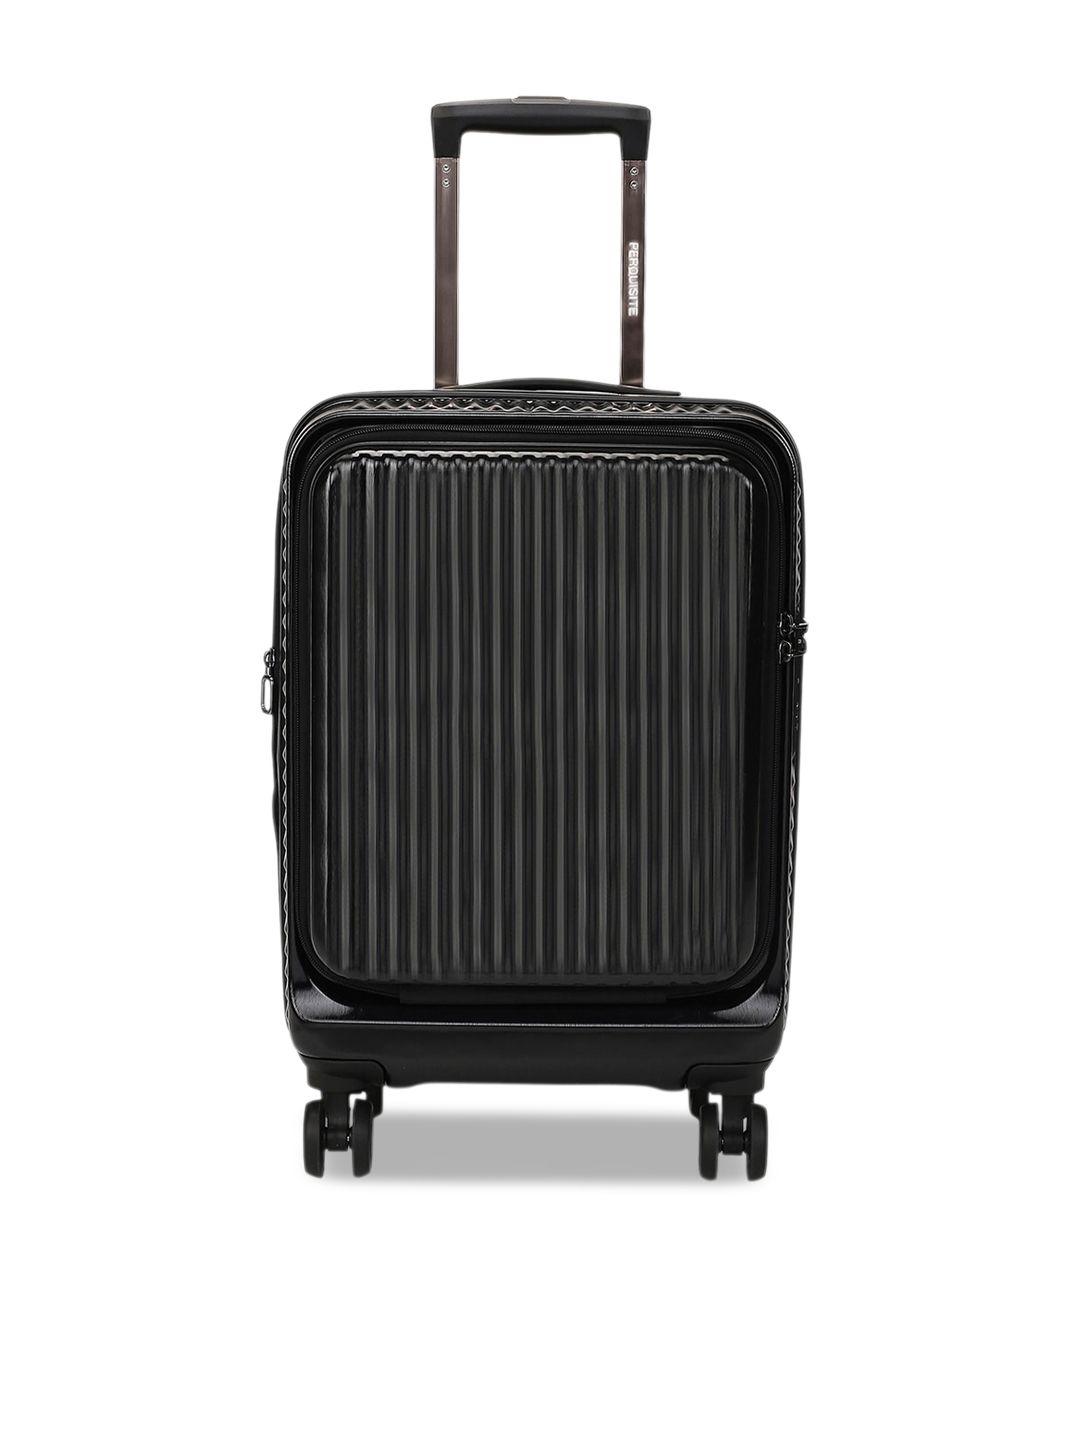 perquisite voyager hard 20" cabin luggage trolley suitcase